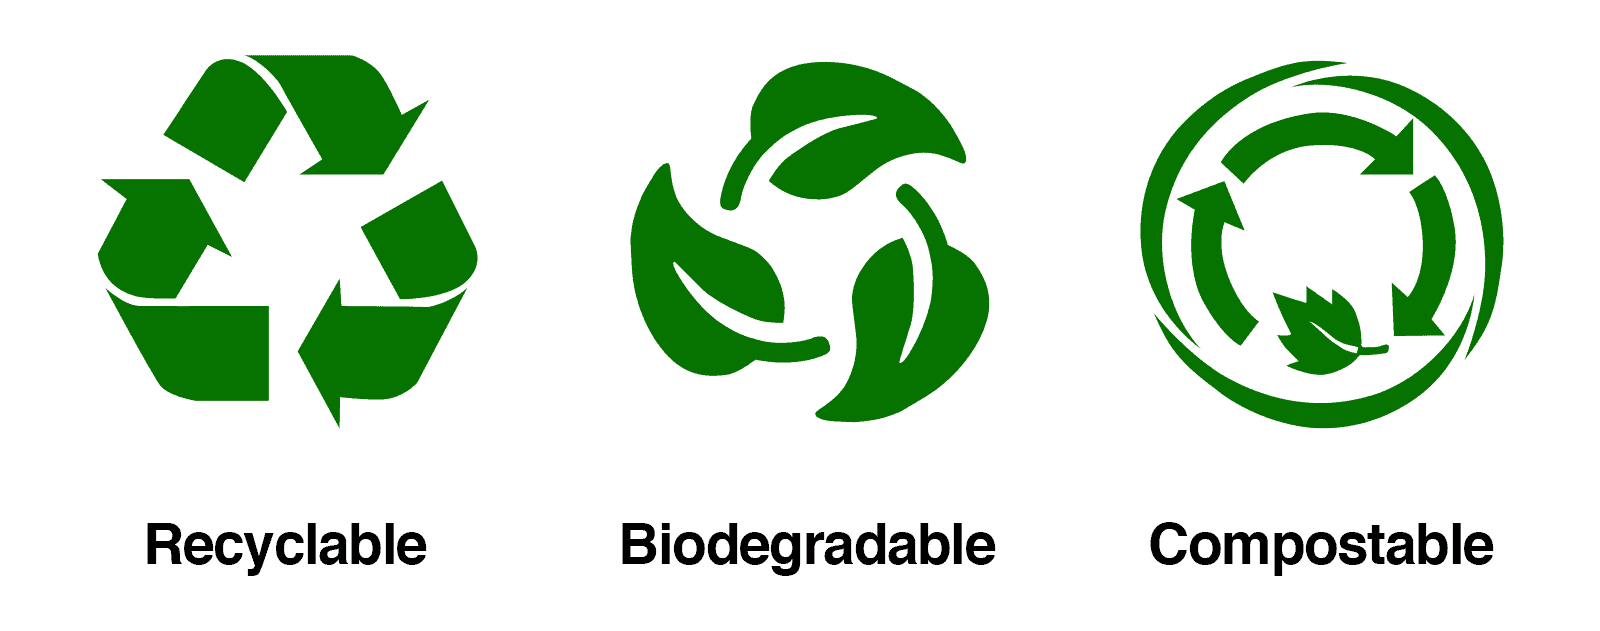 biodegradable compostable recyclable symbols